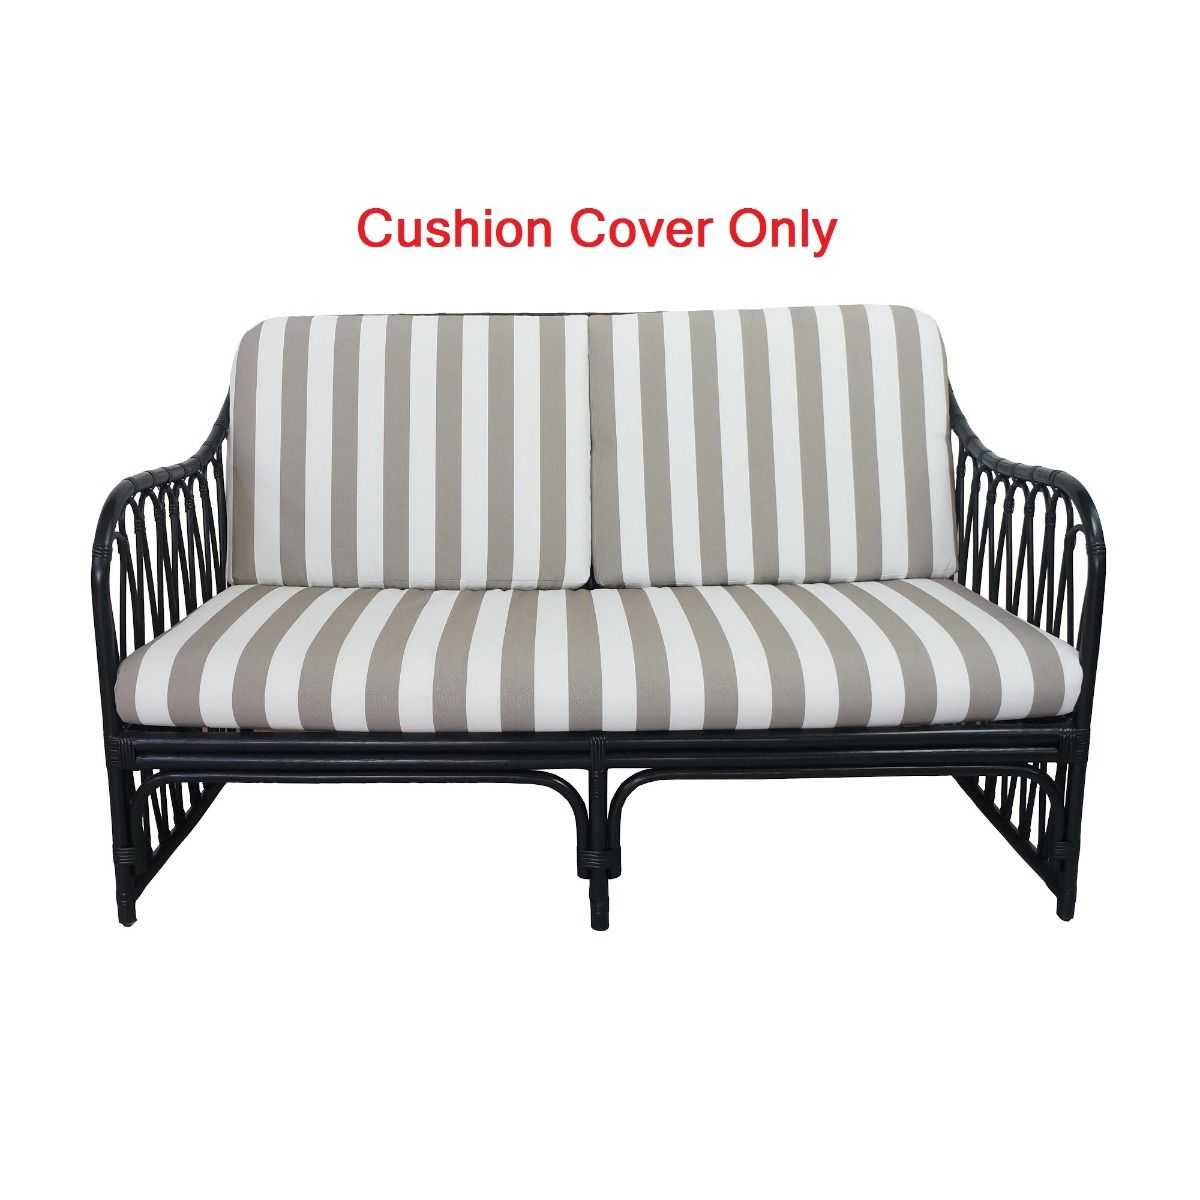 CR Outdoor Cushion Cover for R-0650 Antigua 2.5 Seater